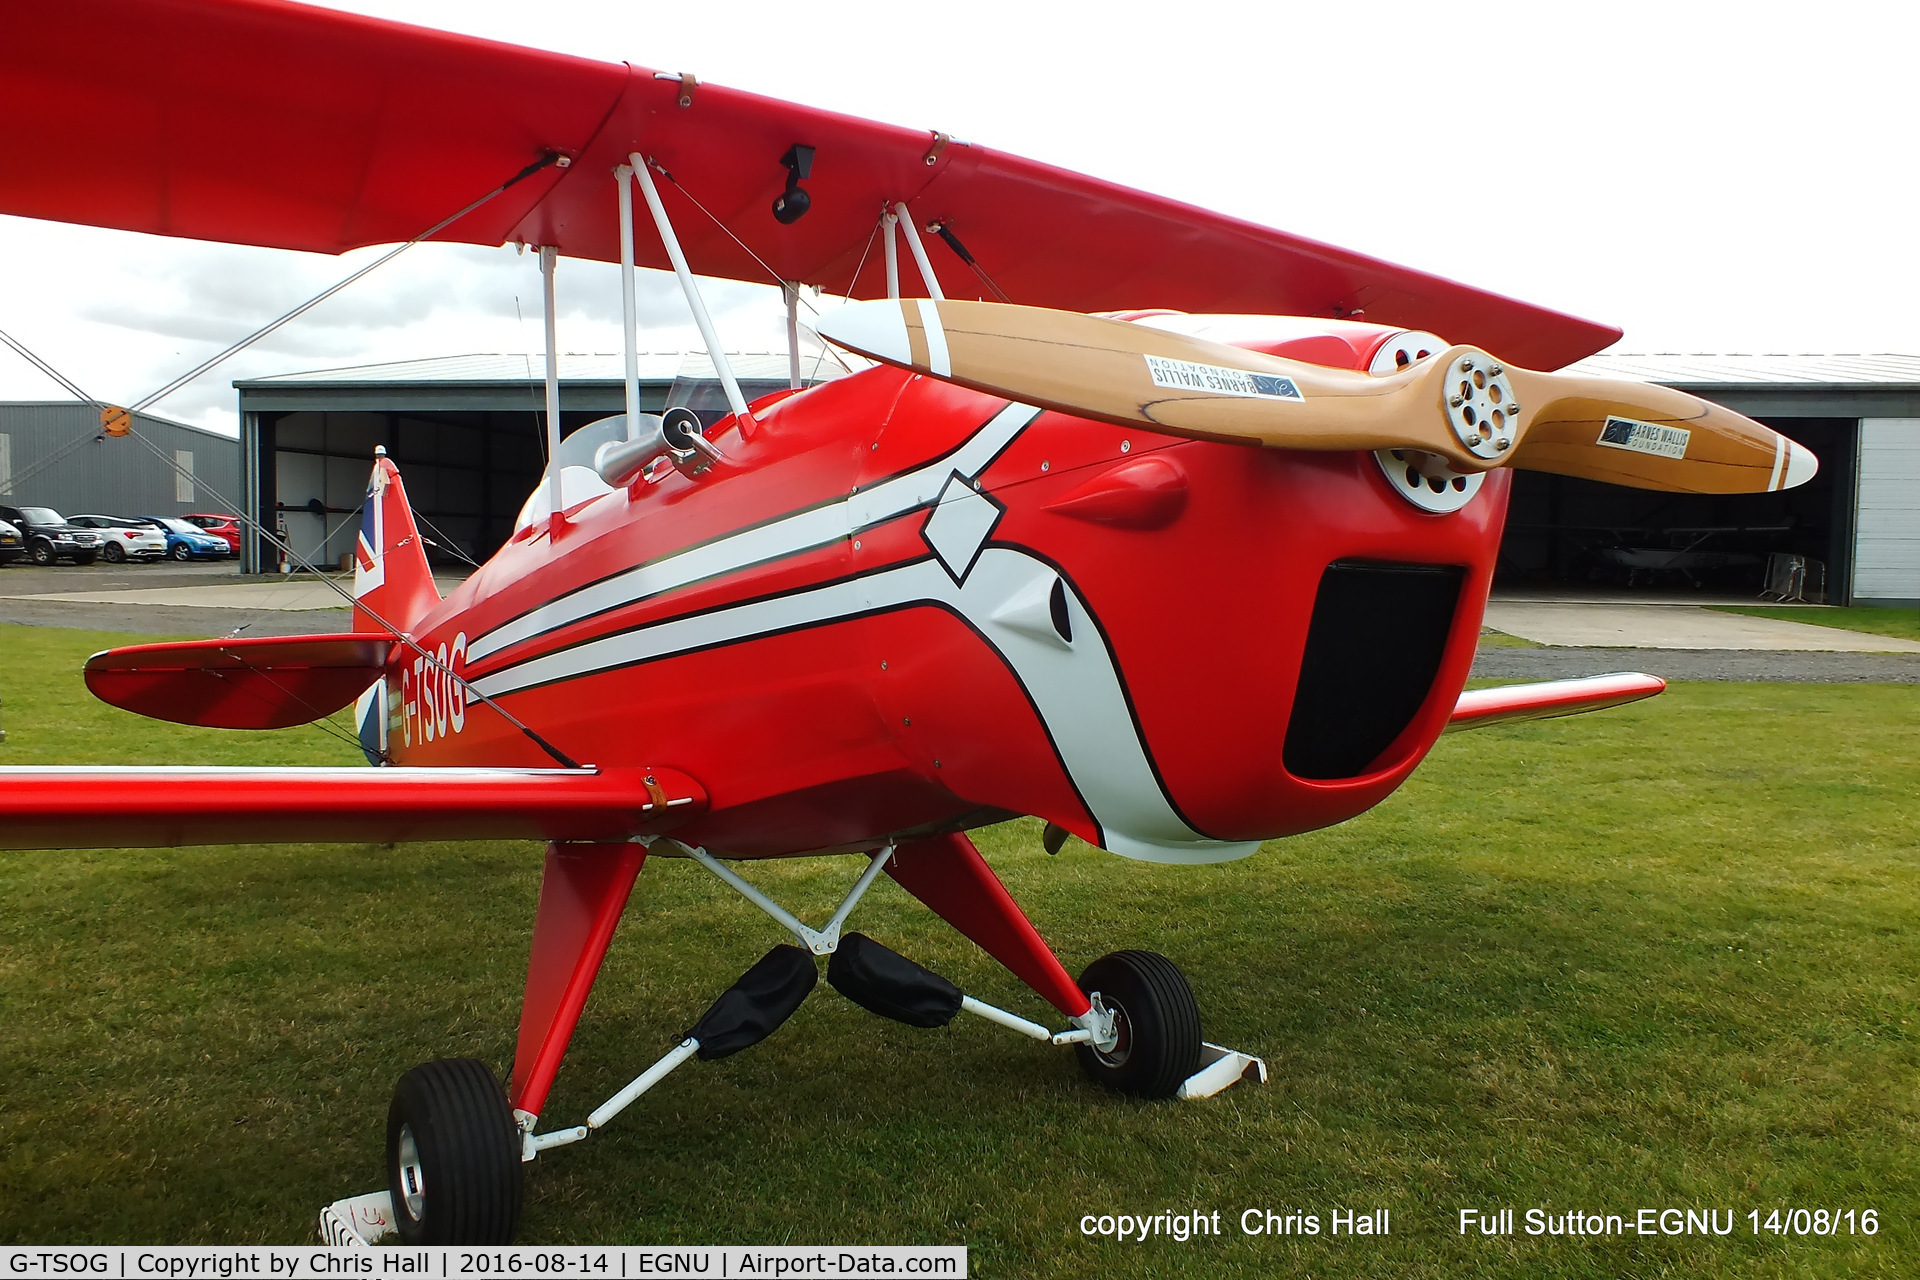 G-TSOG, 2014 TLAC Sherwood Ranger ST C/N LAA 237A-15239, at the LAA Vale of York Strut fly-in, Full Sutton